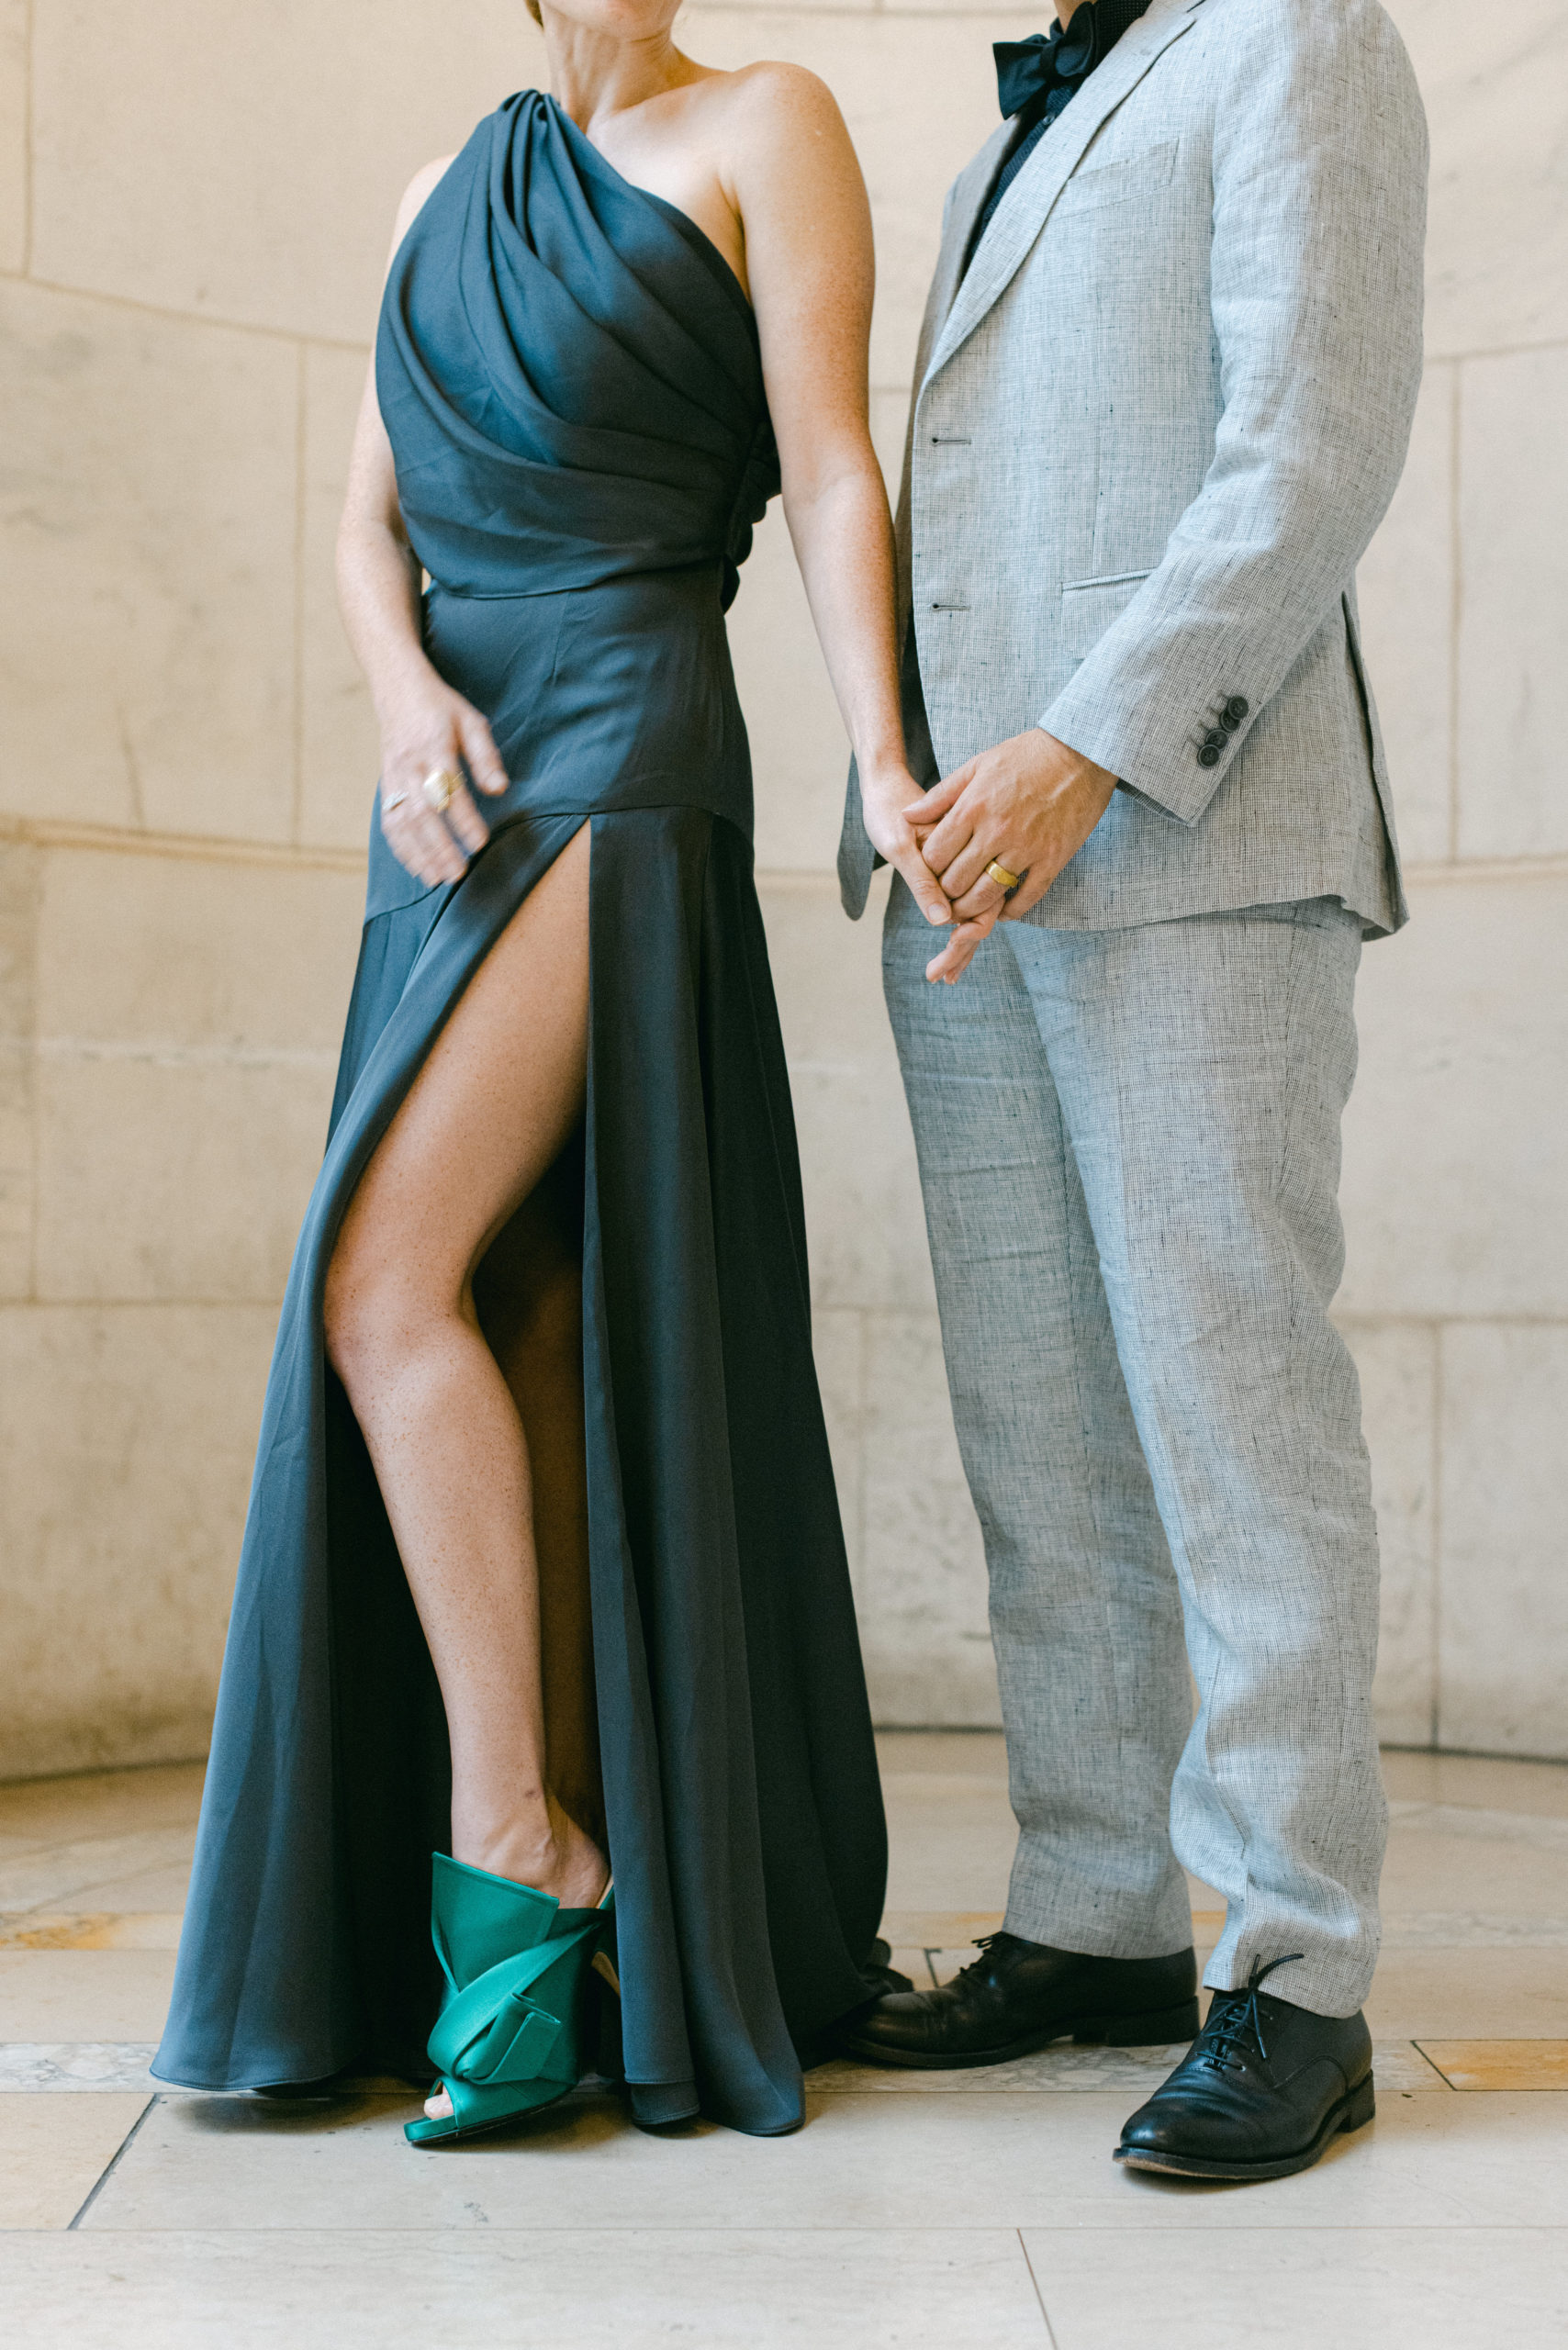 Stylish New York City Couple in grey suit and blue dress with green shoes